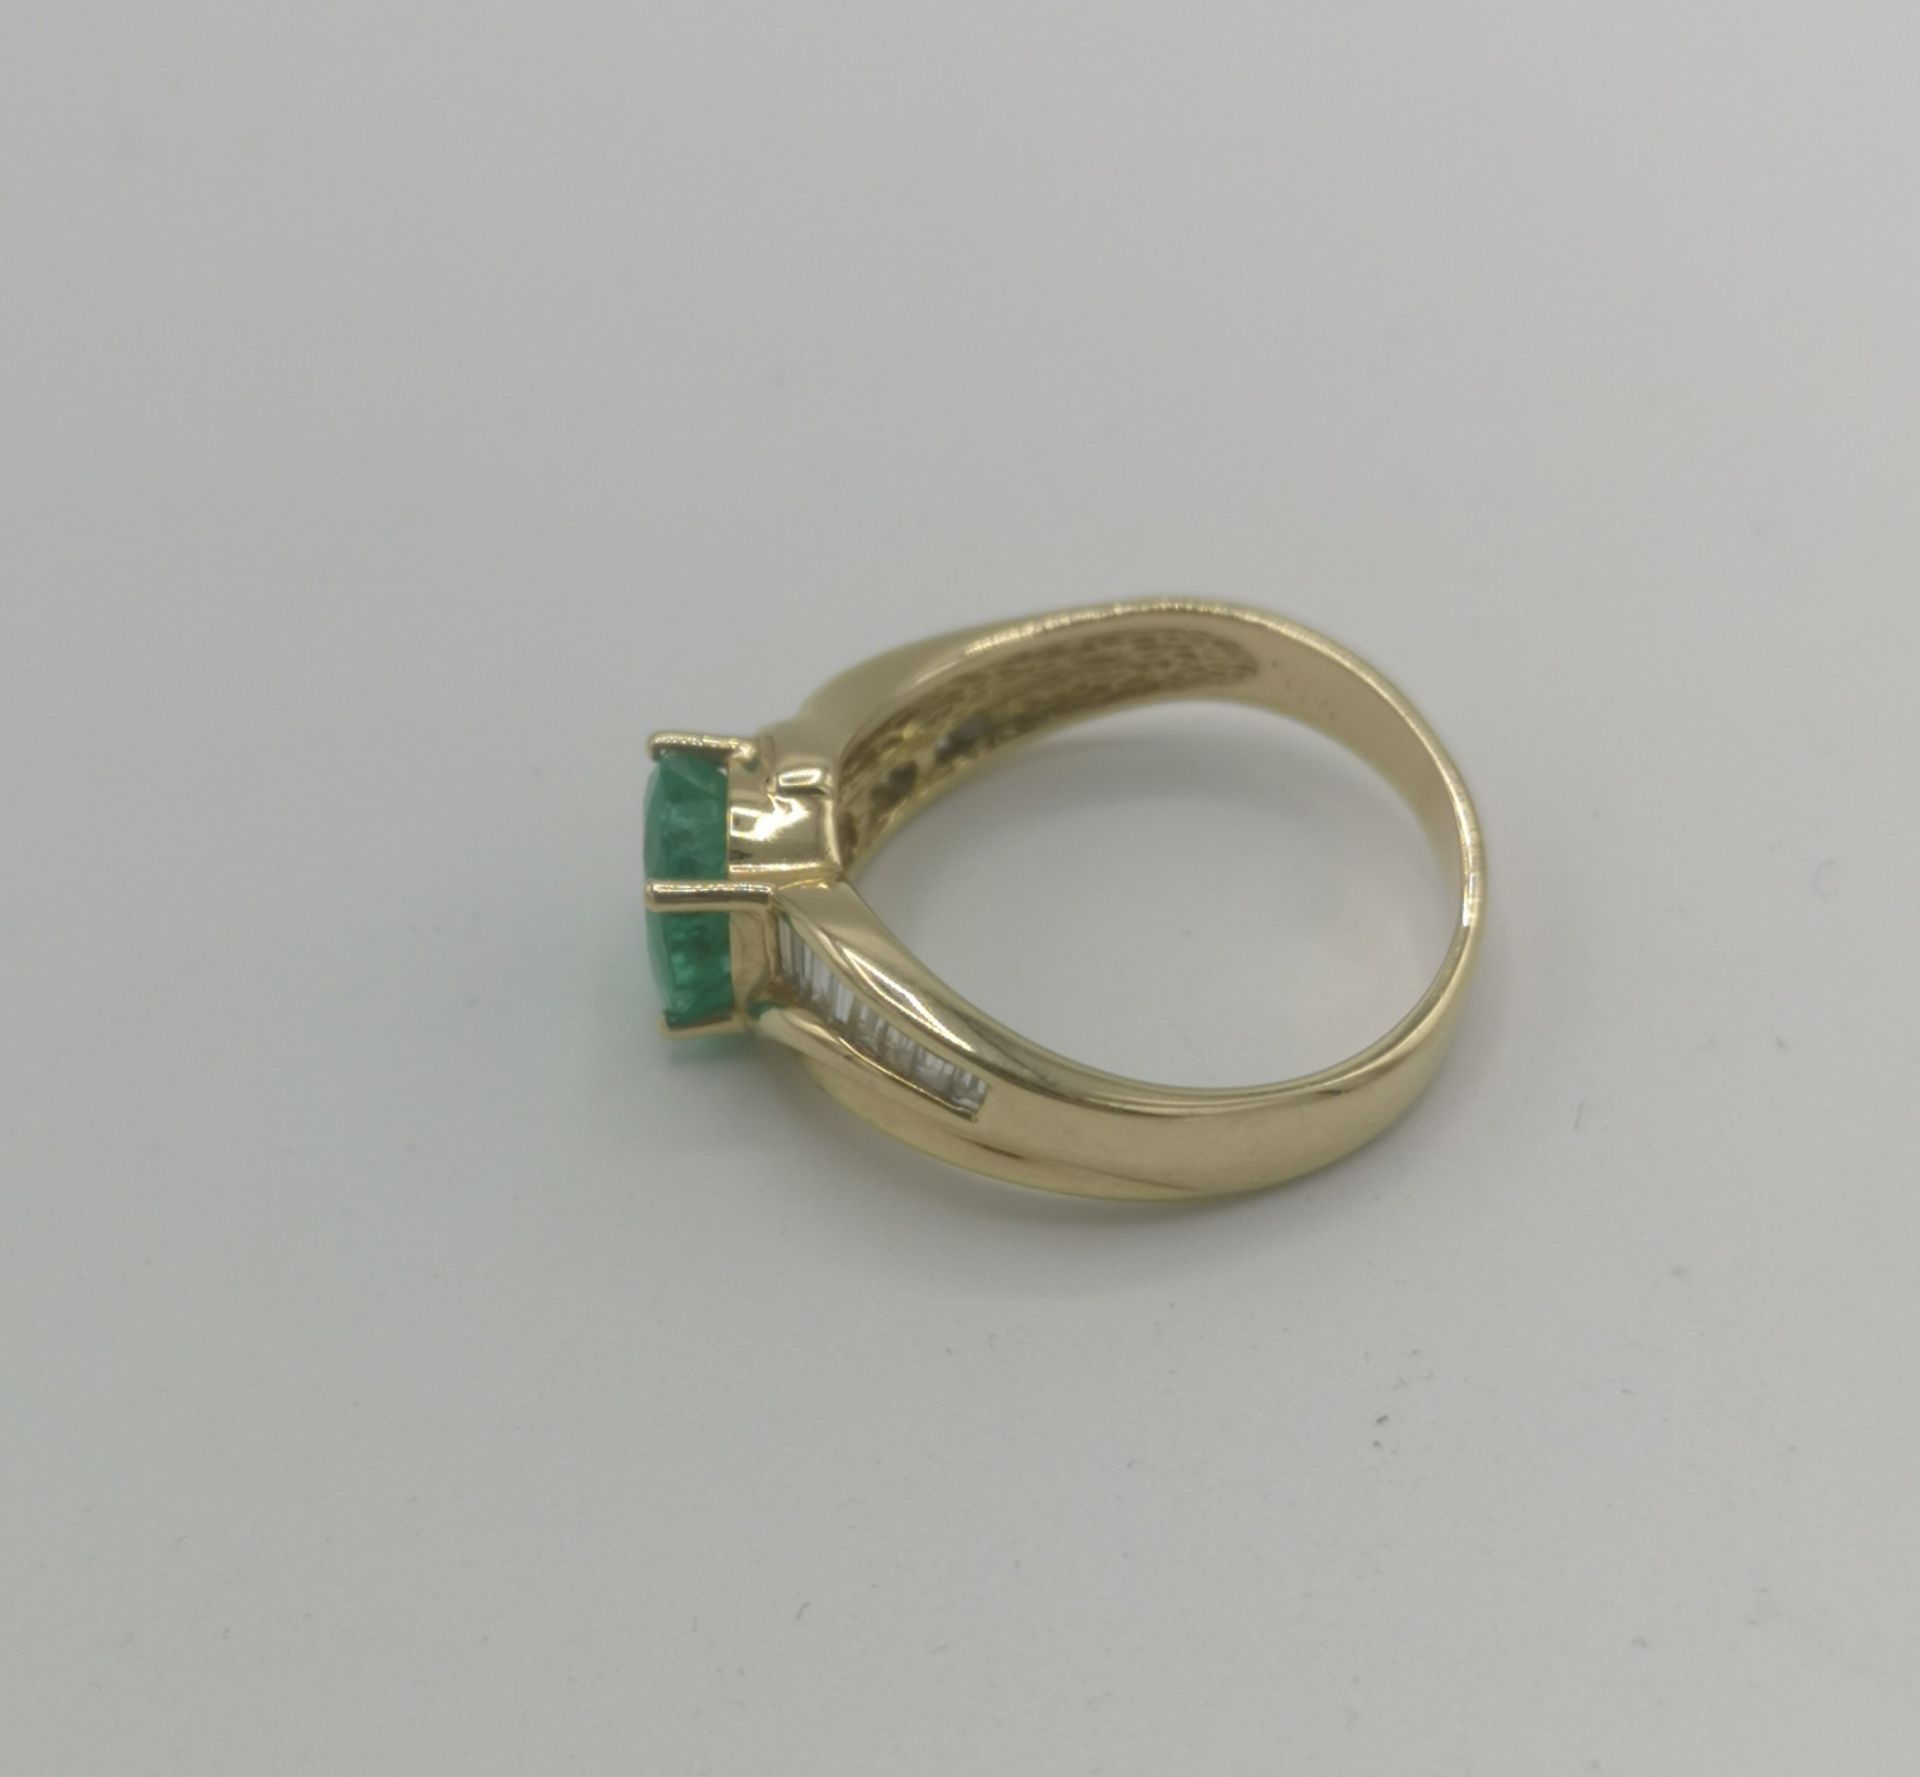 Emerald and diamond ring - Image 3 of 4